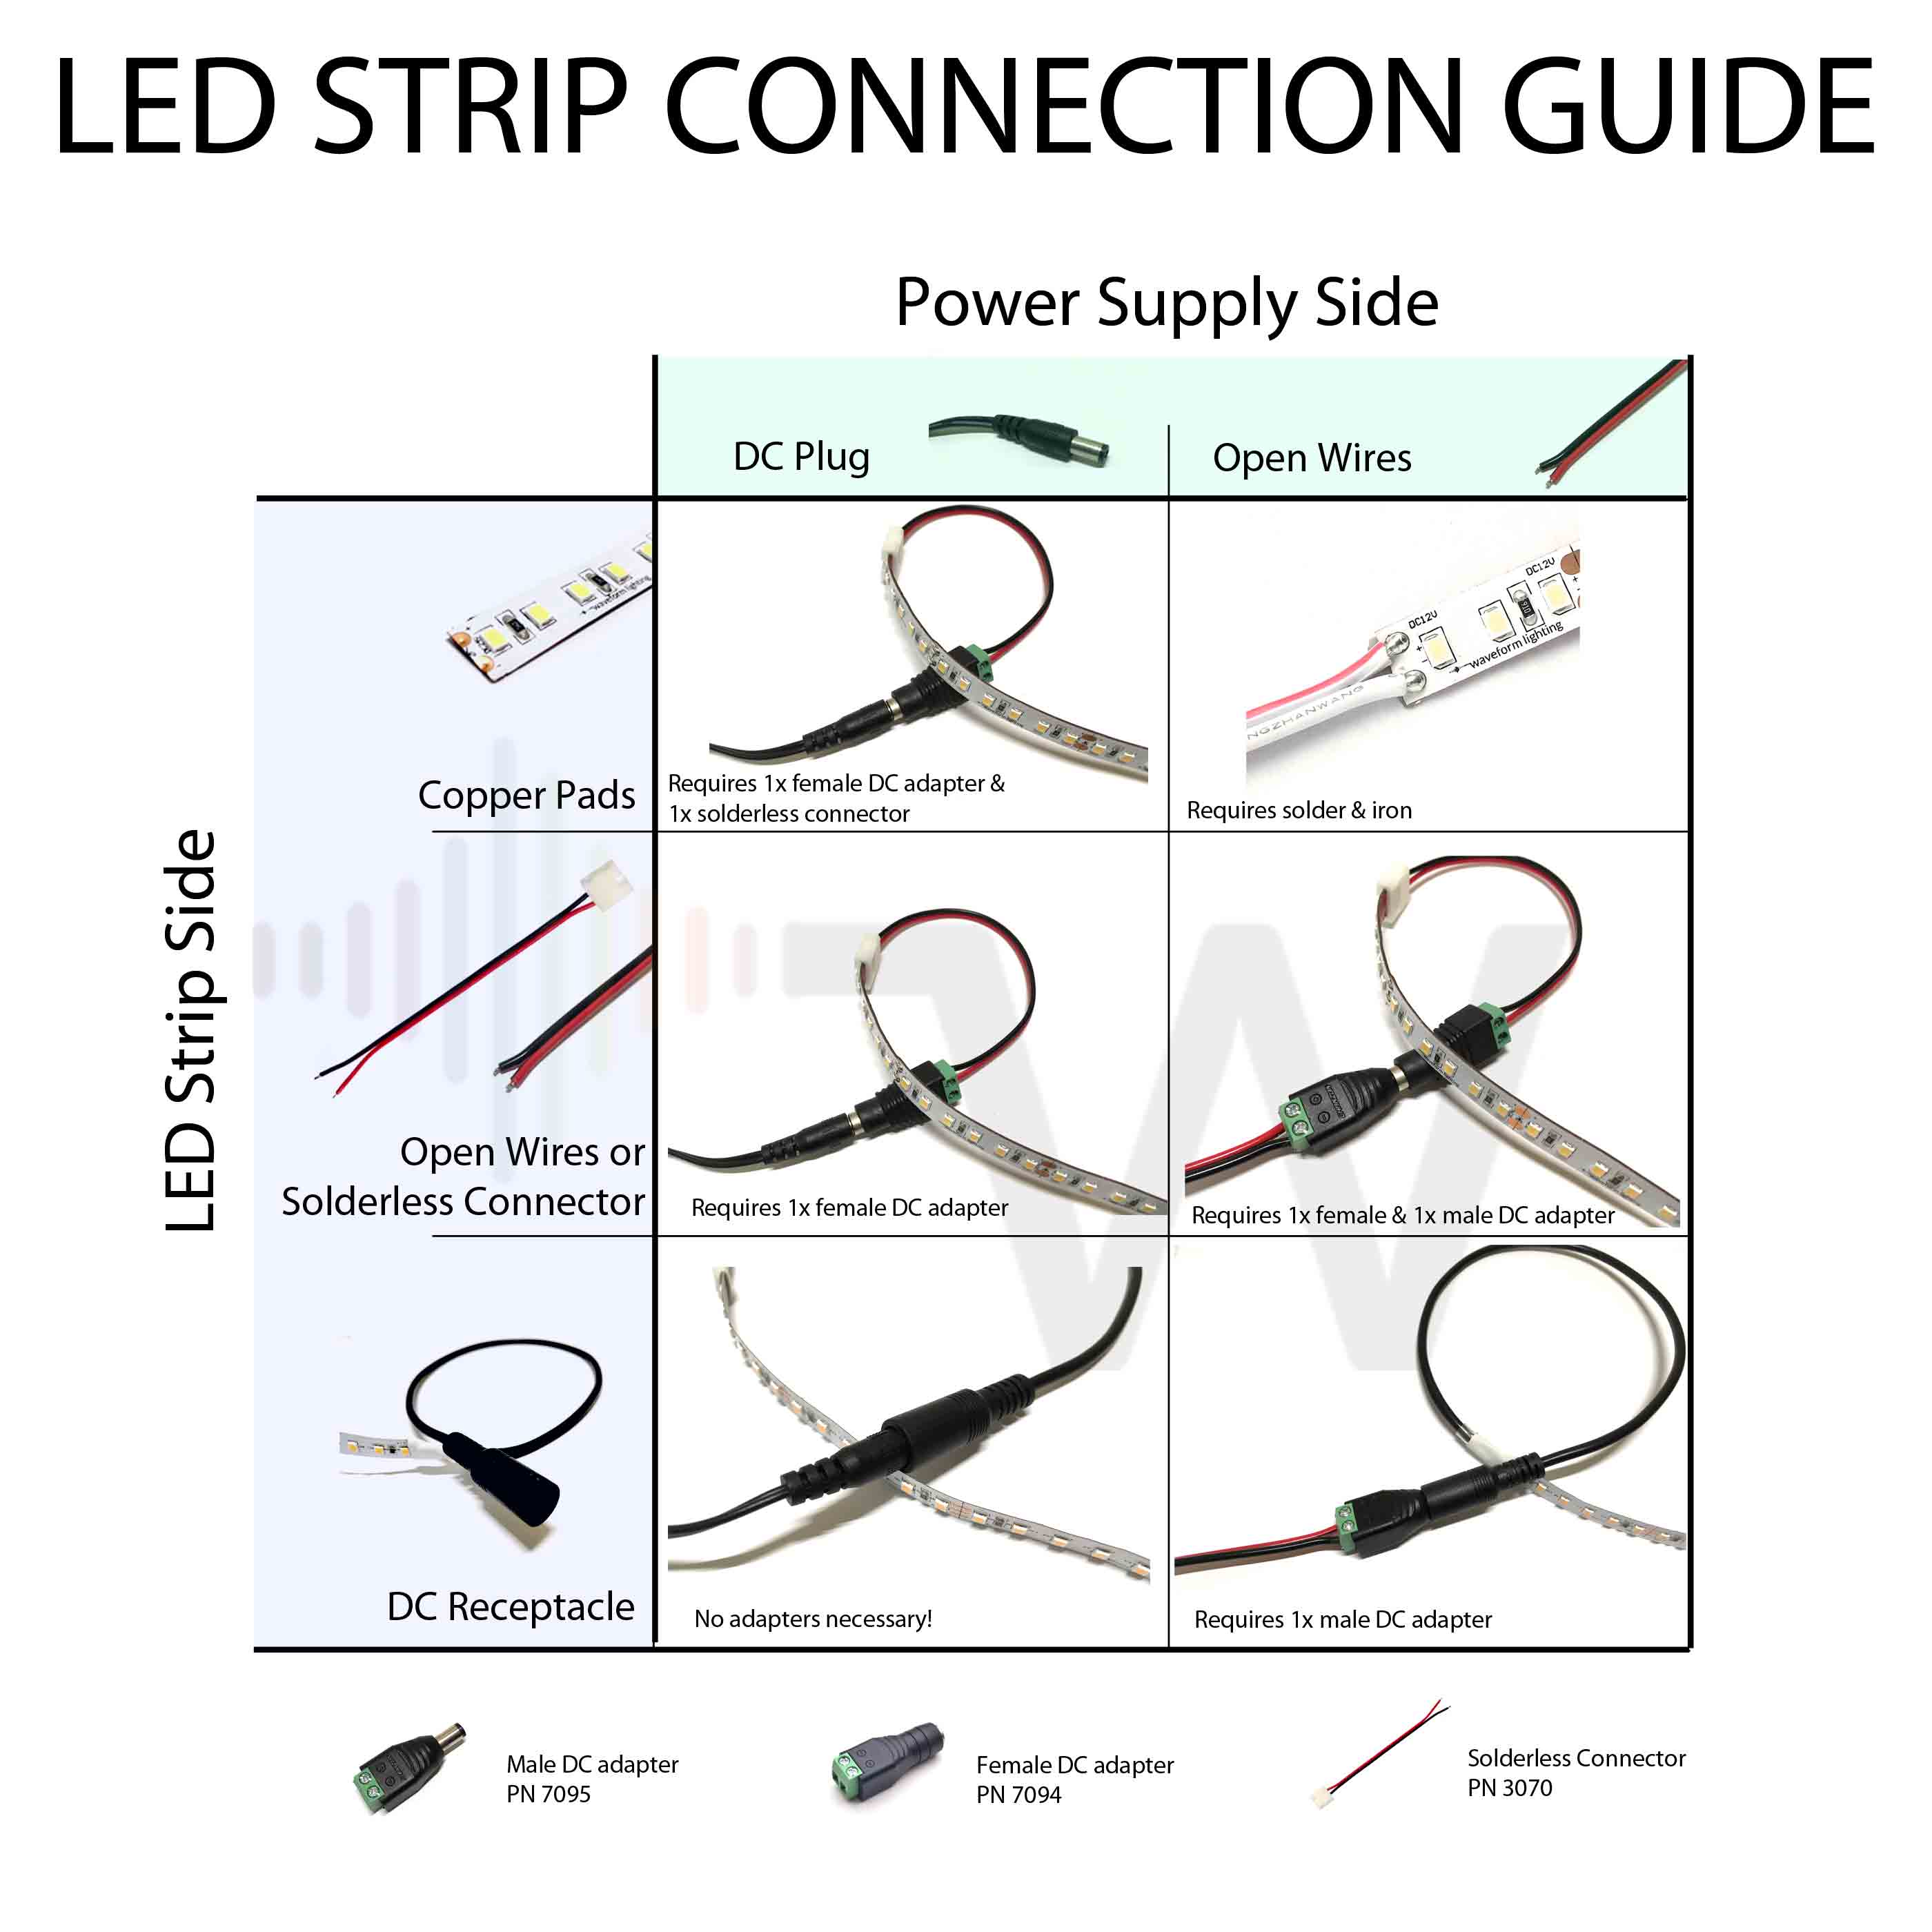 How To Wire Led Light How to Connect An LED Strip to a Power Supply | Waveform Lighting